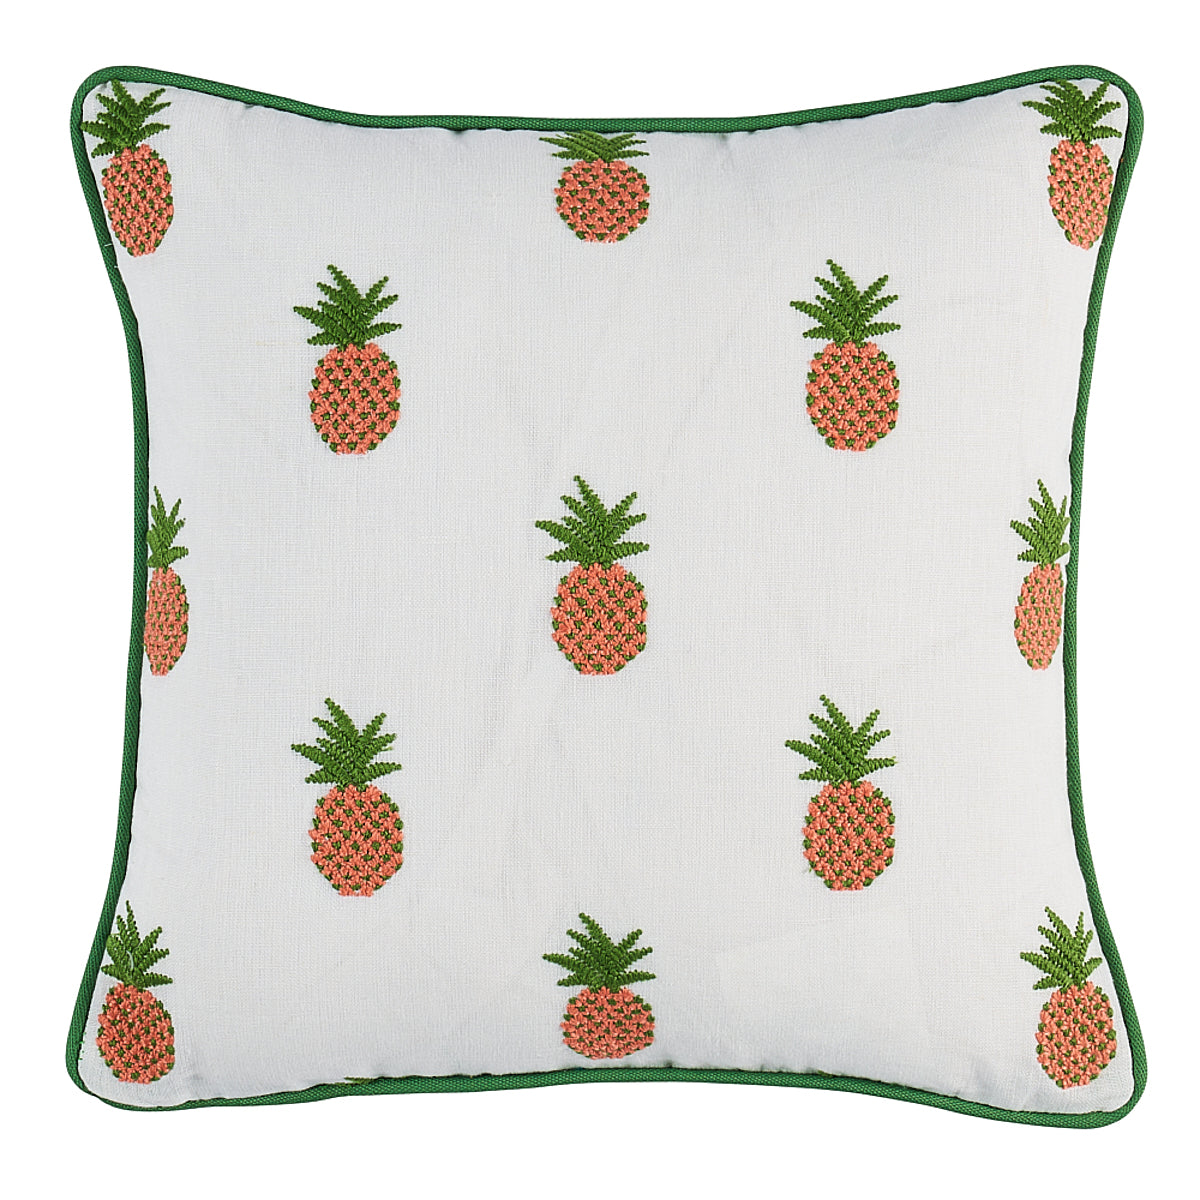 Pineapple Embroidery Pillow | Apricot on Ivory